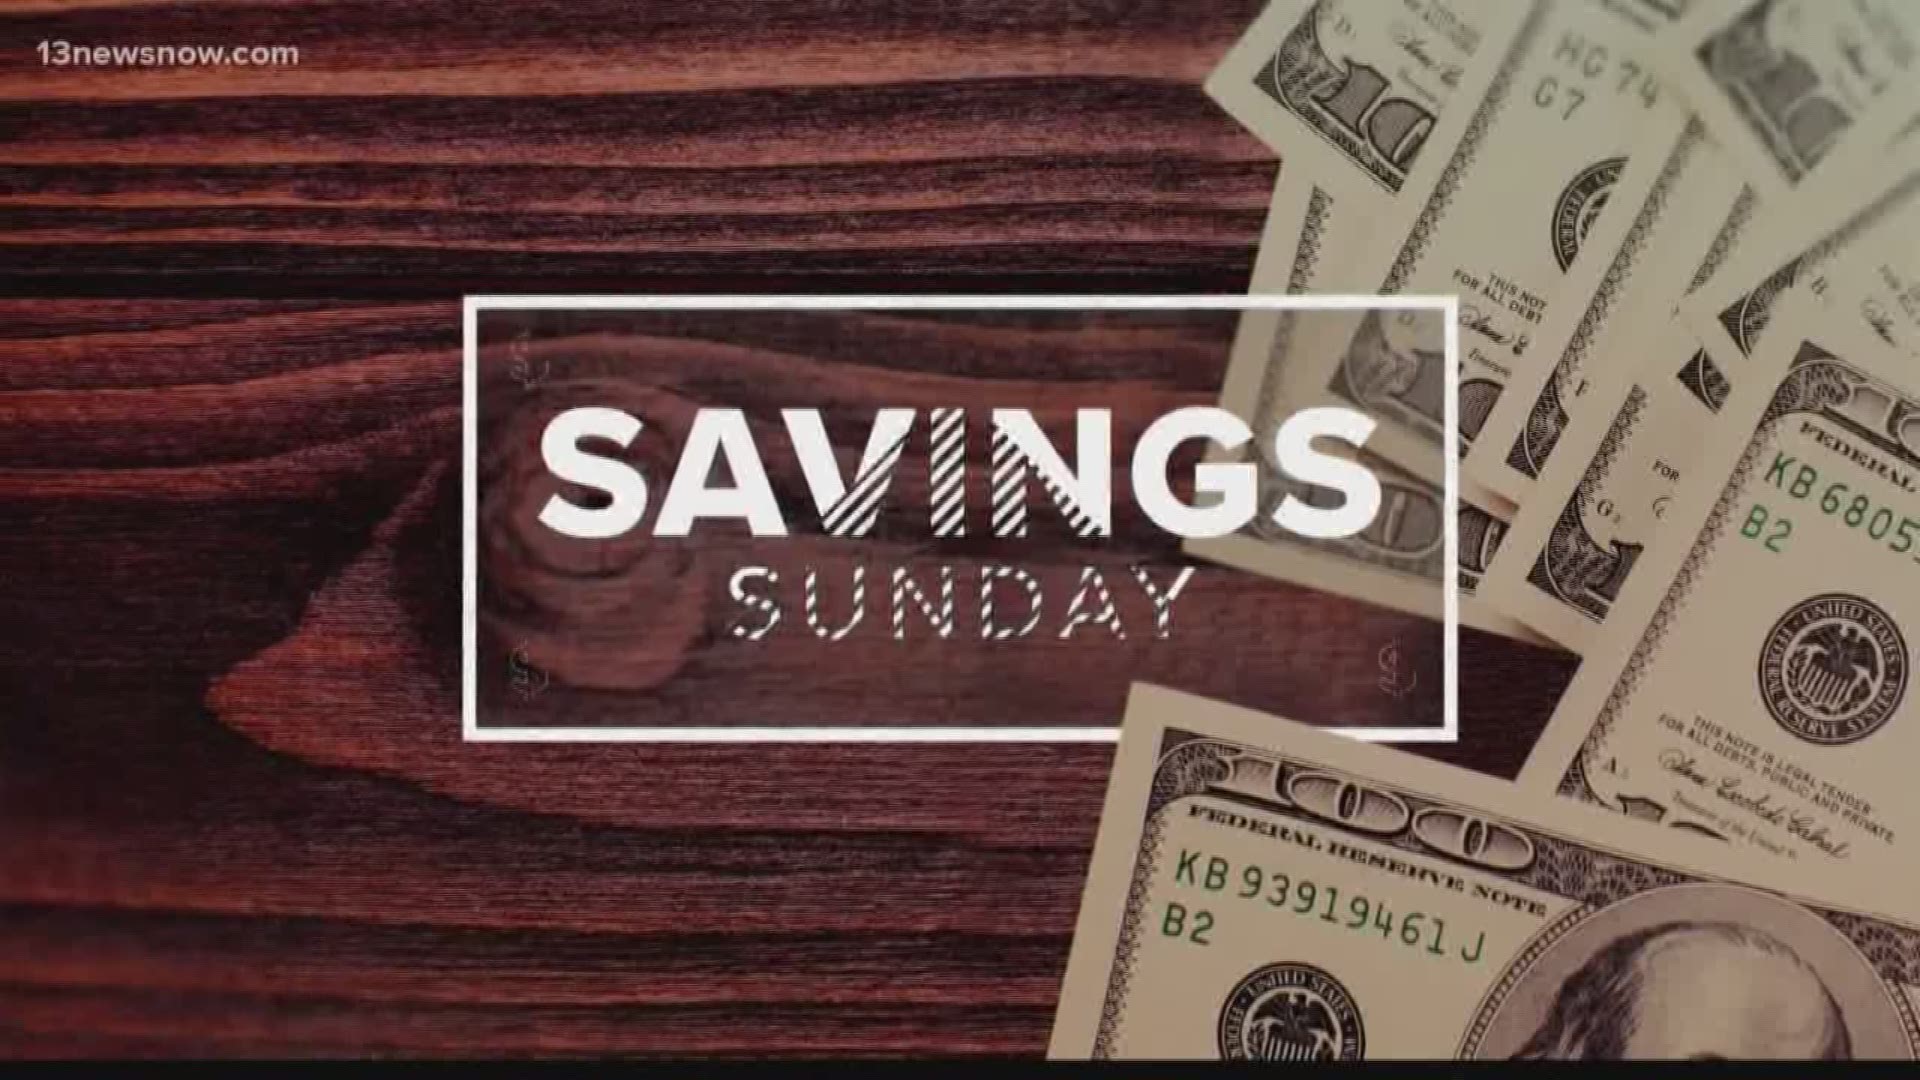 Laura Oliver from afrugralchick.com has your big savings for the week of Jan. 27, 2019.